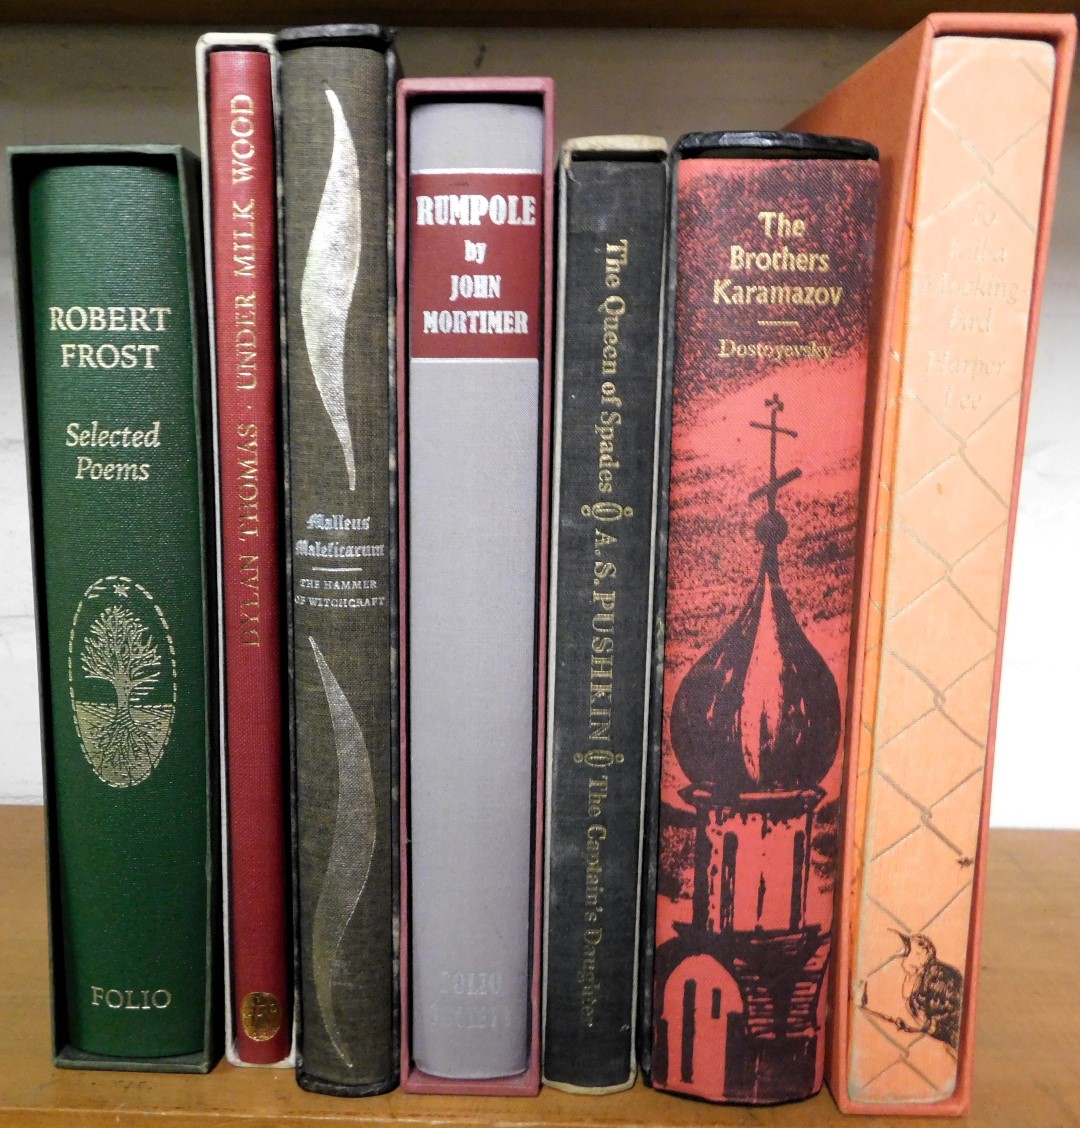 Books. Folio Society, comprising Frost (Robert) Selected Poems, Thomas (Dylan) Under Milk Wood, The